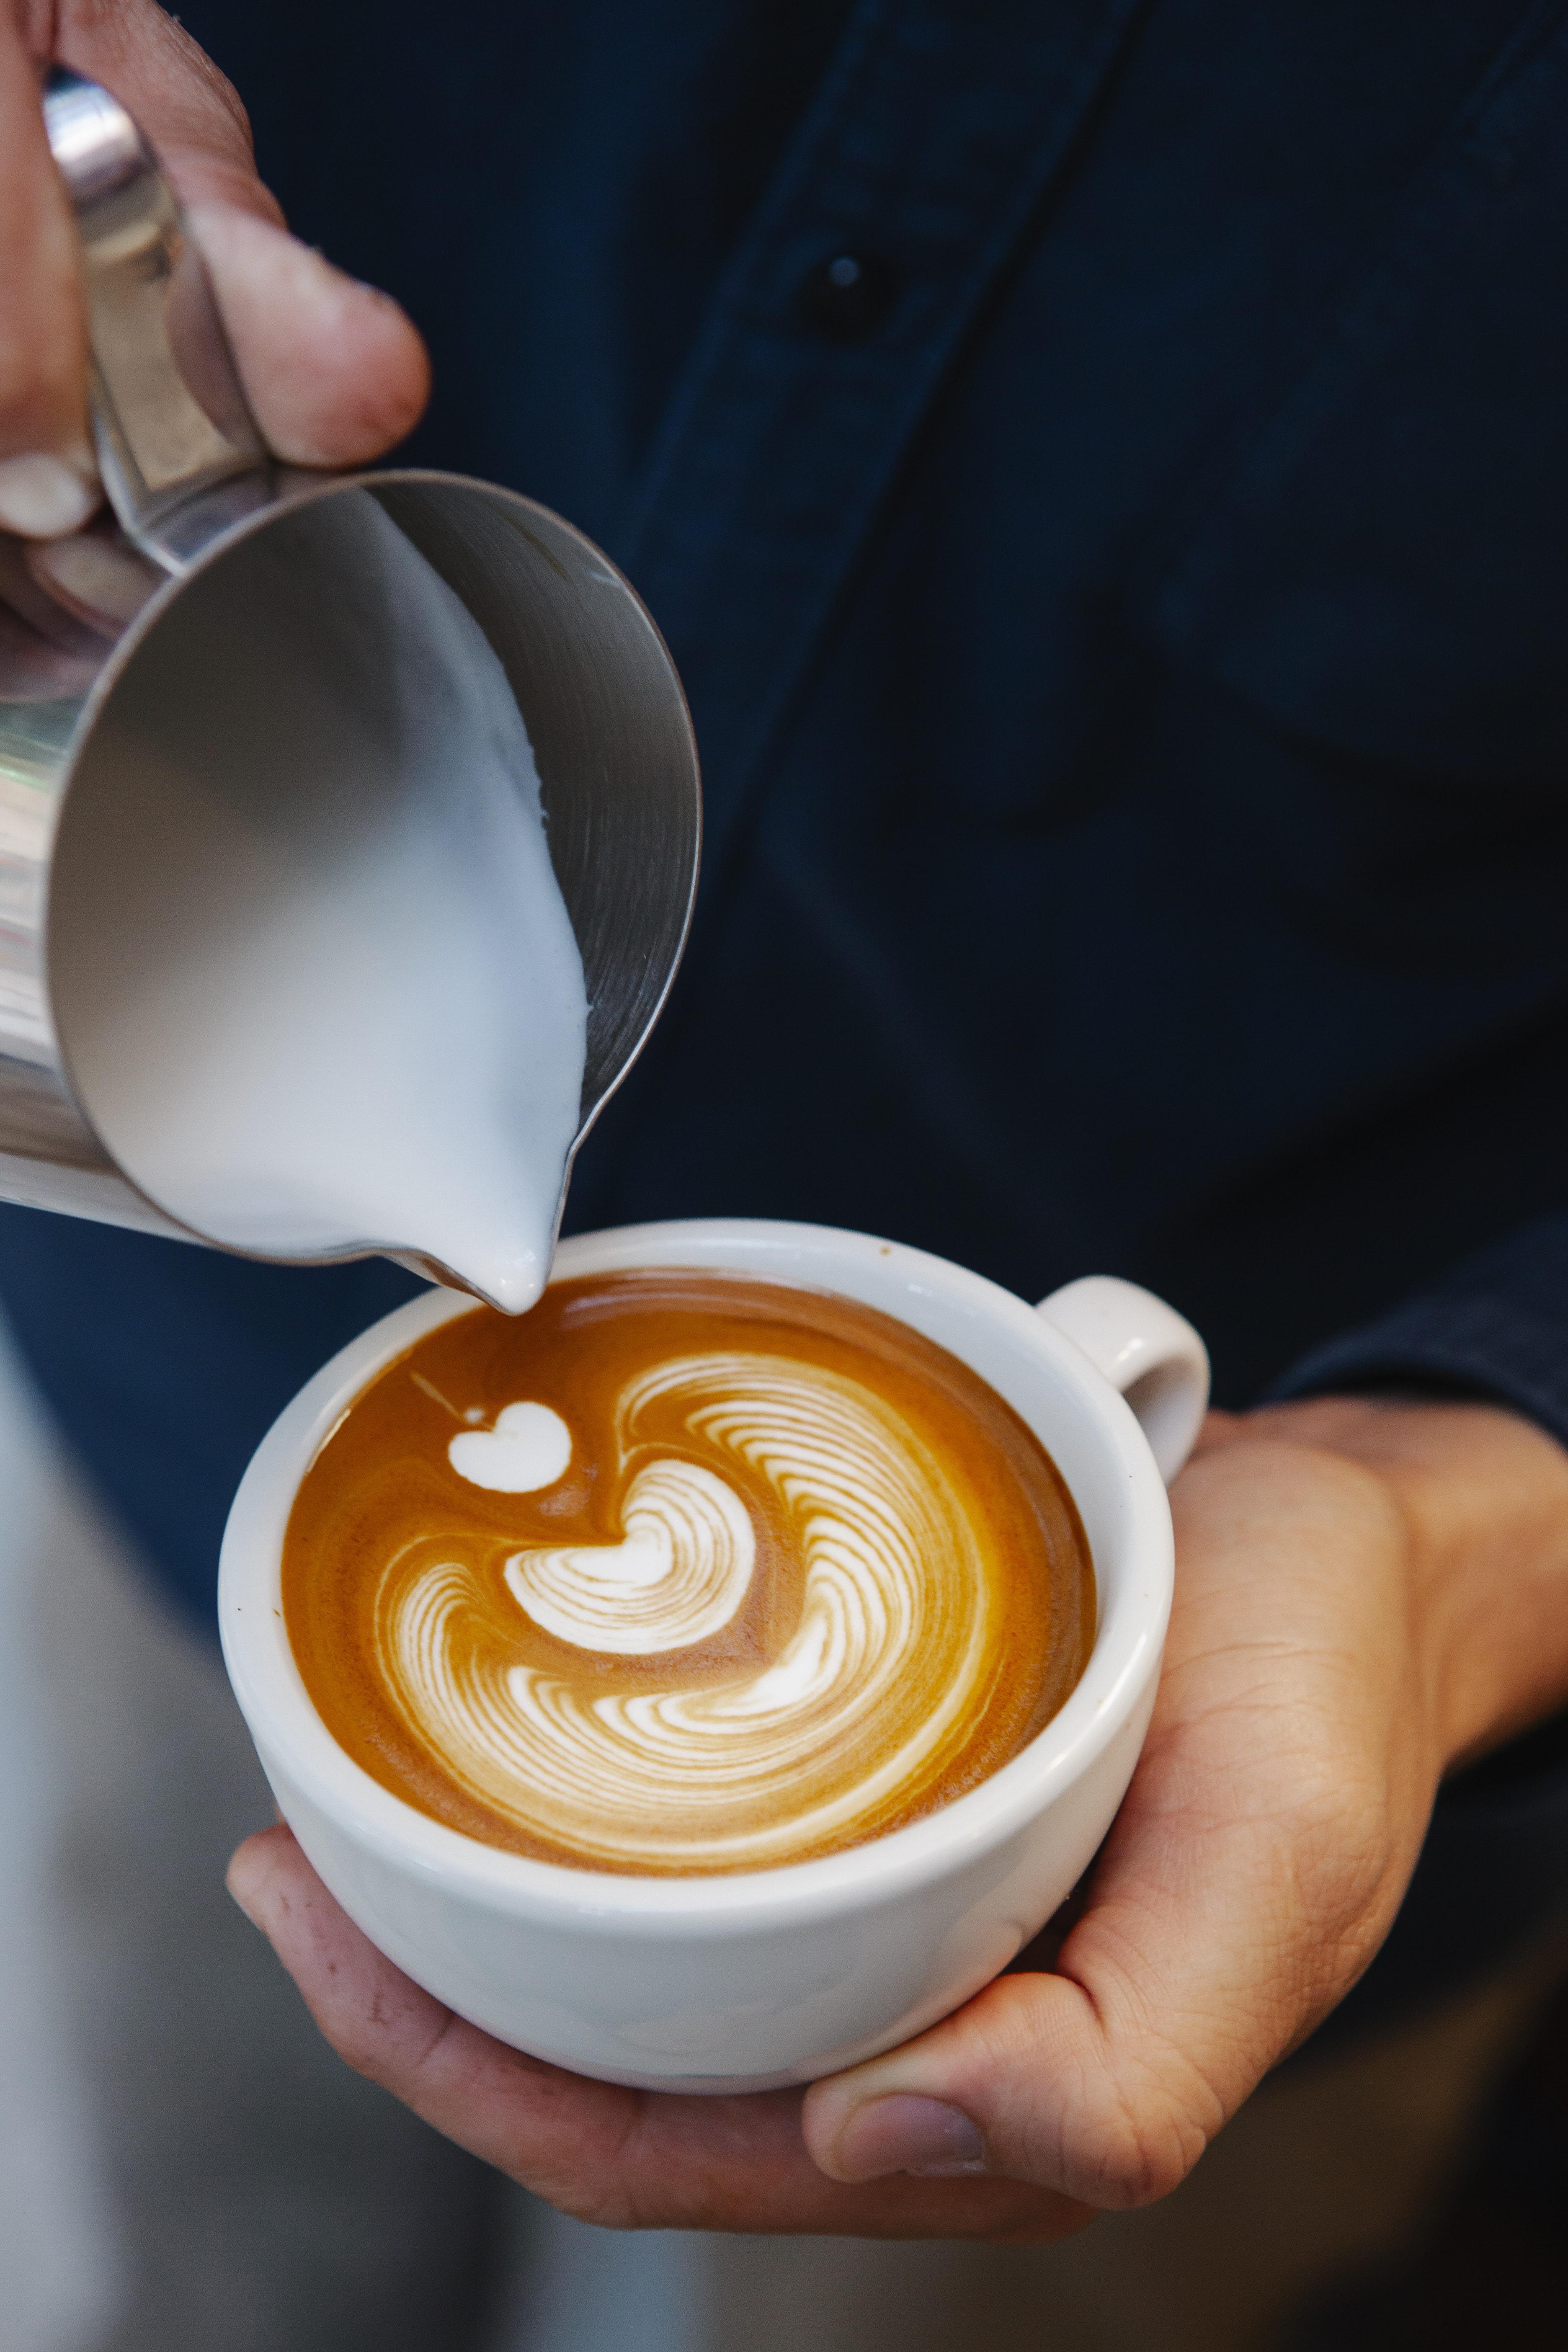  How To Make Latte Art With Keurig 